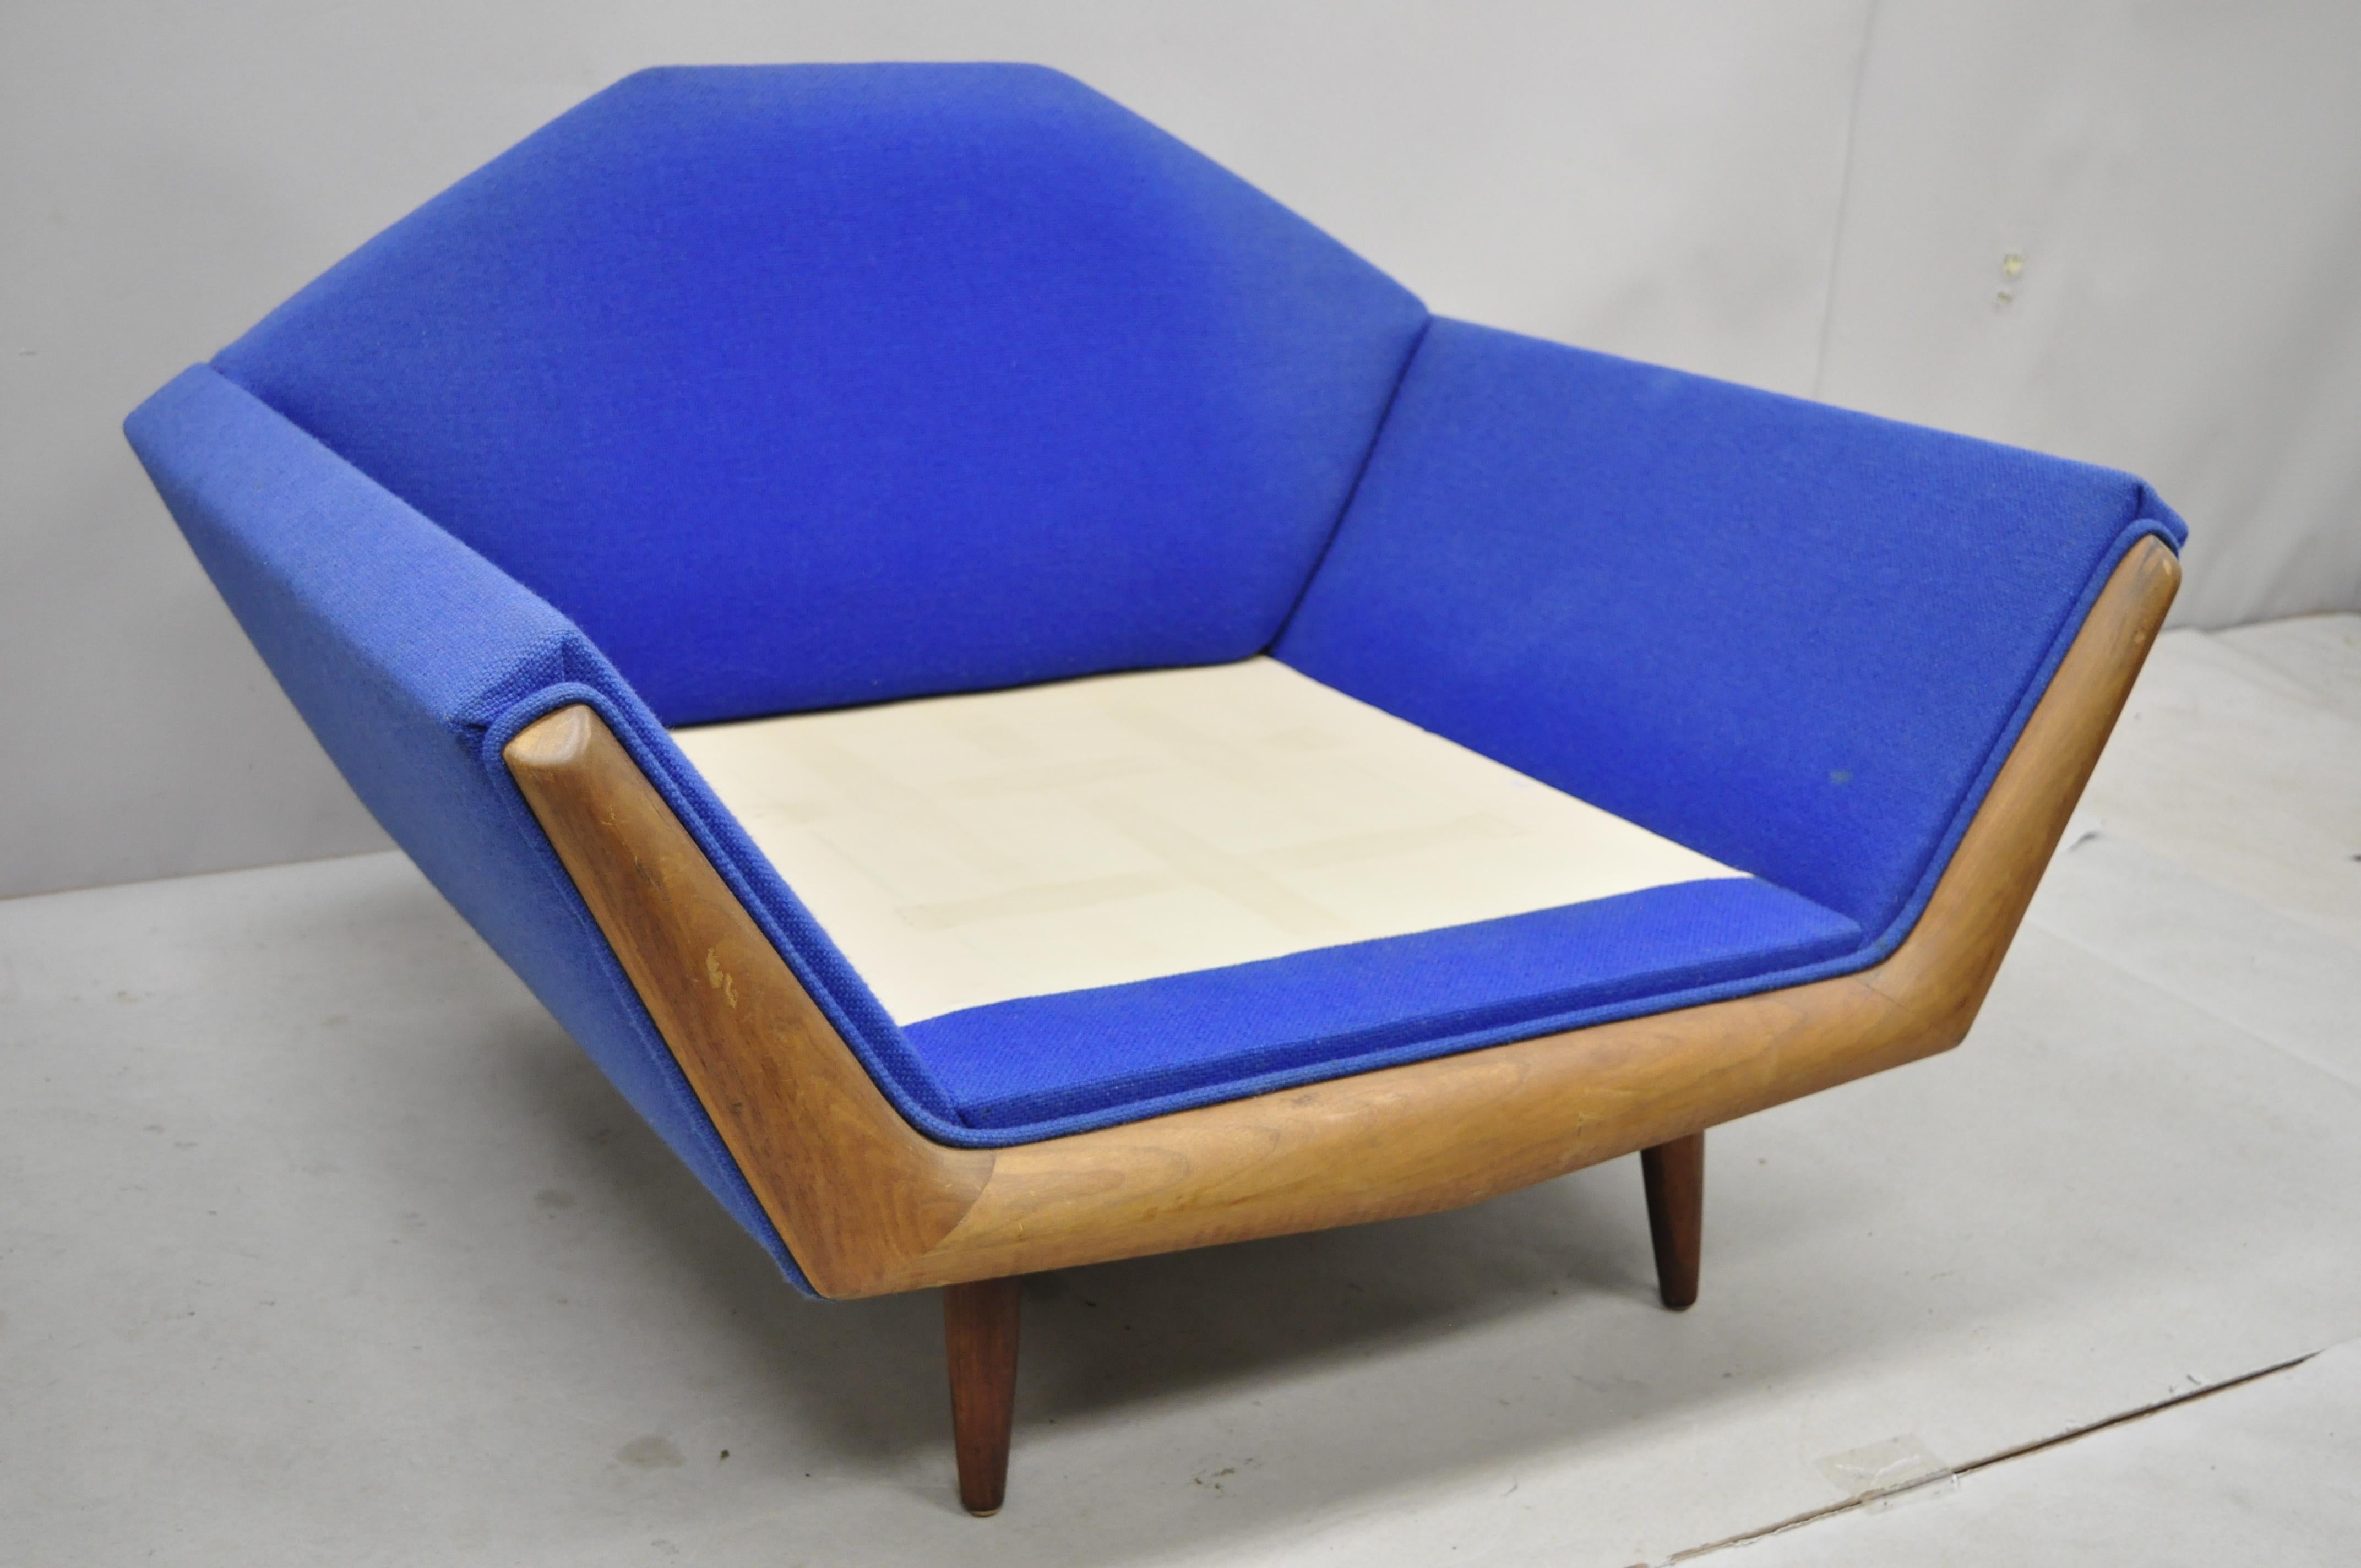 Mid-Century Modern Adrian Pearsall oversized sculptural walnut lounge club chair. Item includes a large oversized frame, solid wood construction, beautiful wood grain, tapered legs, sleek sculptural form Maker unconfirmed but attributed to Adrian